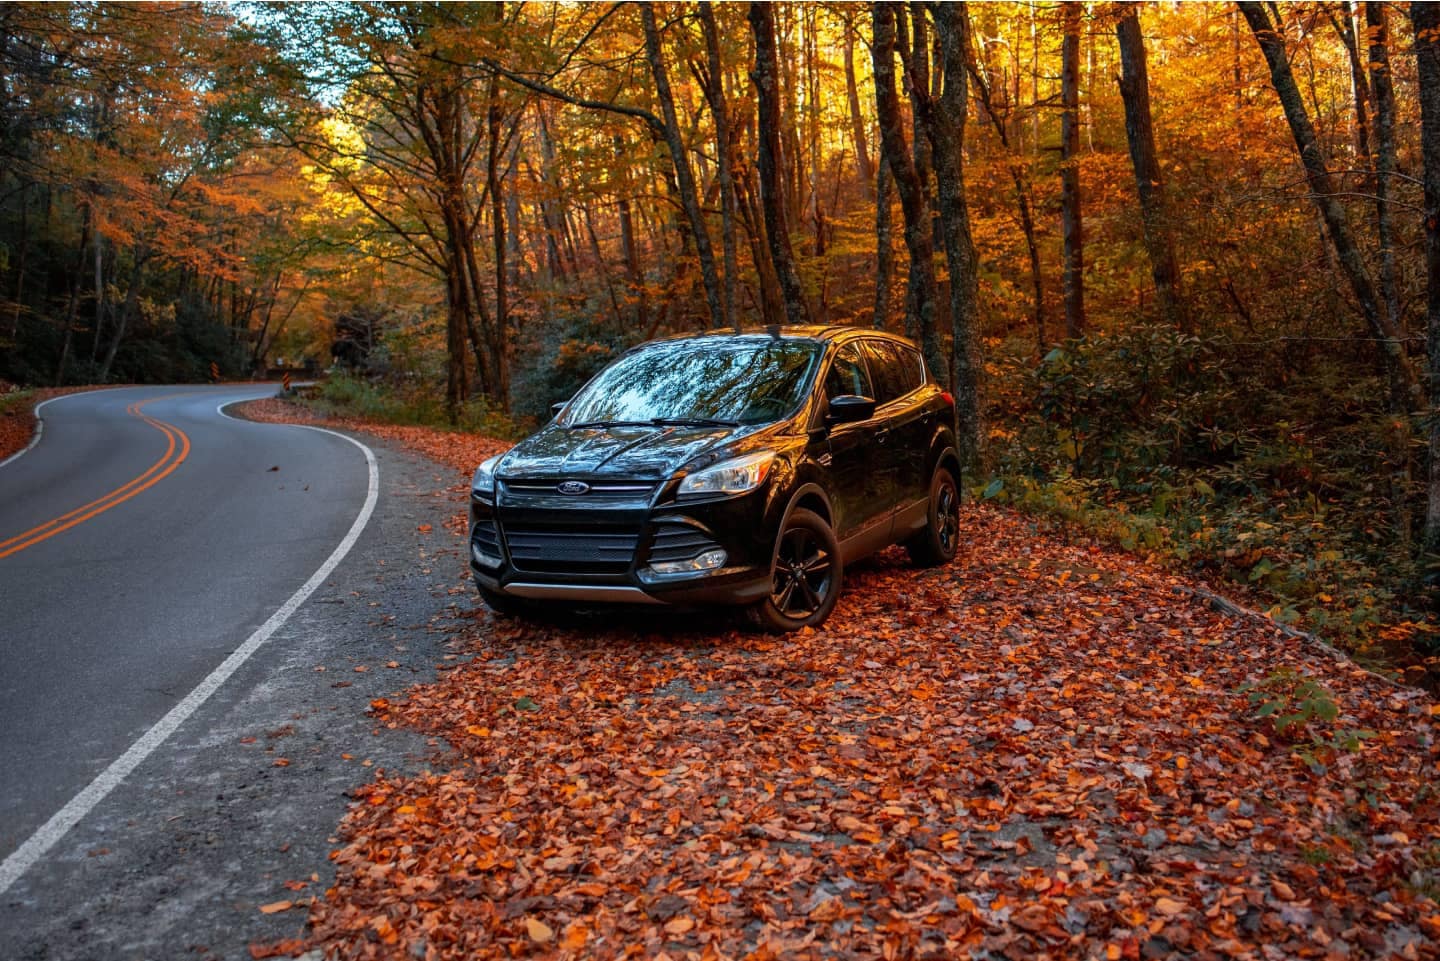 Used Black Ford Escape parked on the side of a windy road in a field of fall leaves.